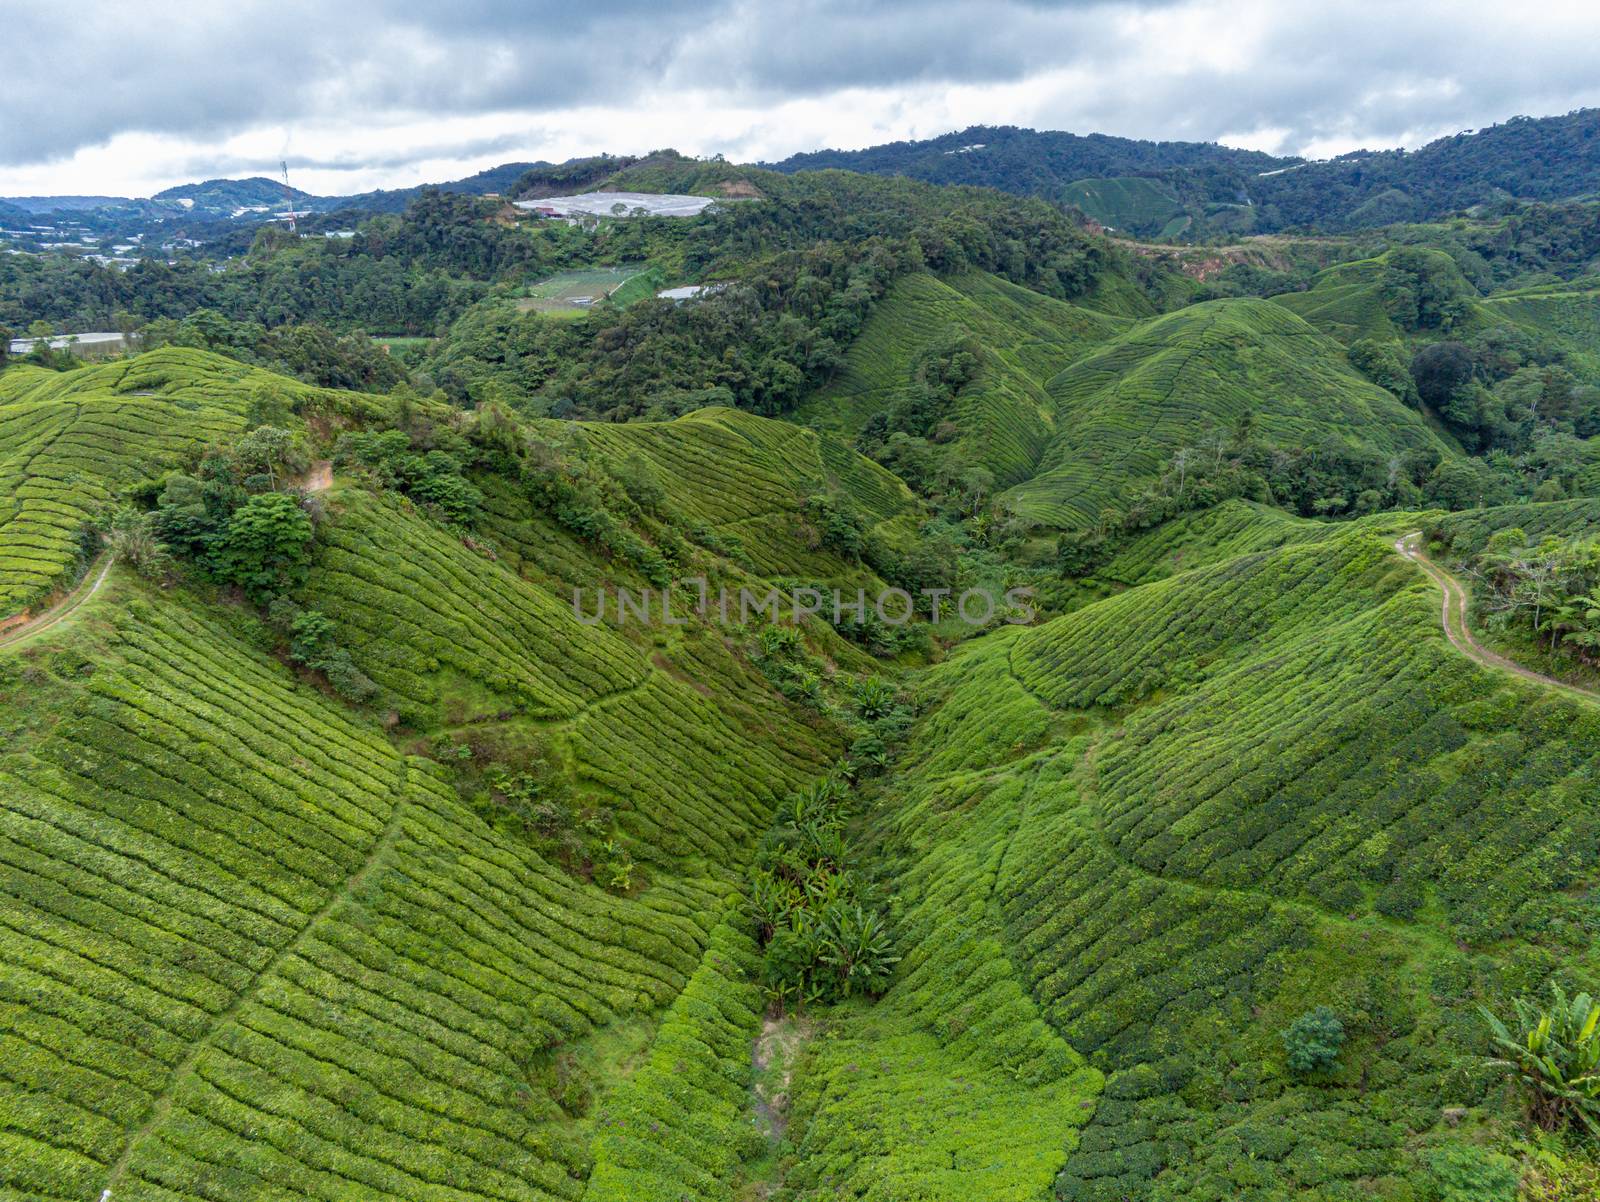 Tea plantation aerial photo showing rows of camellia sinensis covering mountains in the Cameron Highlands